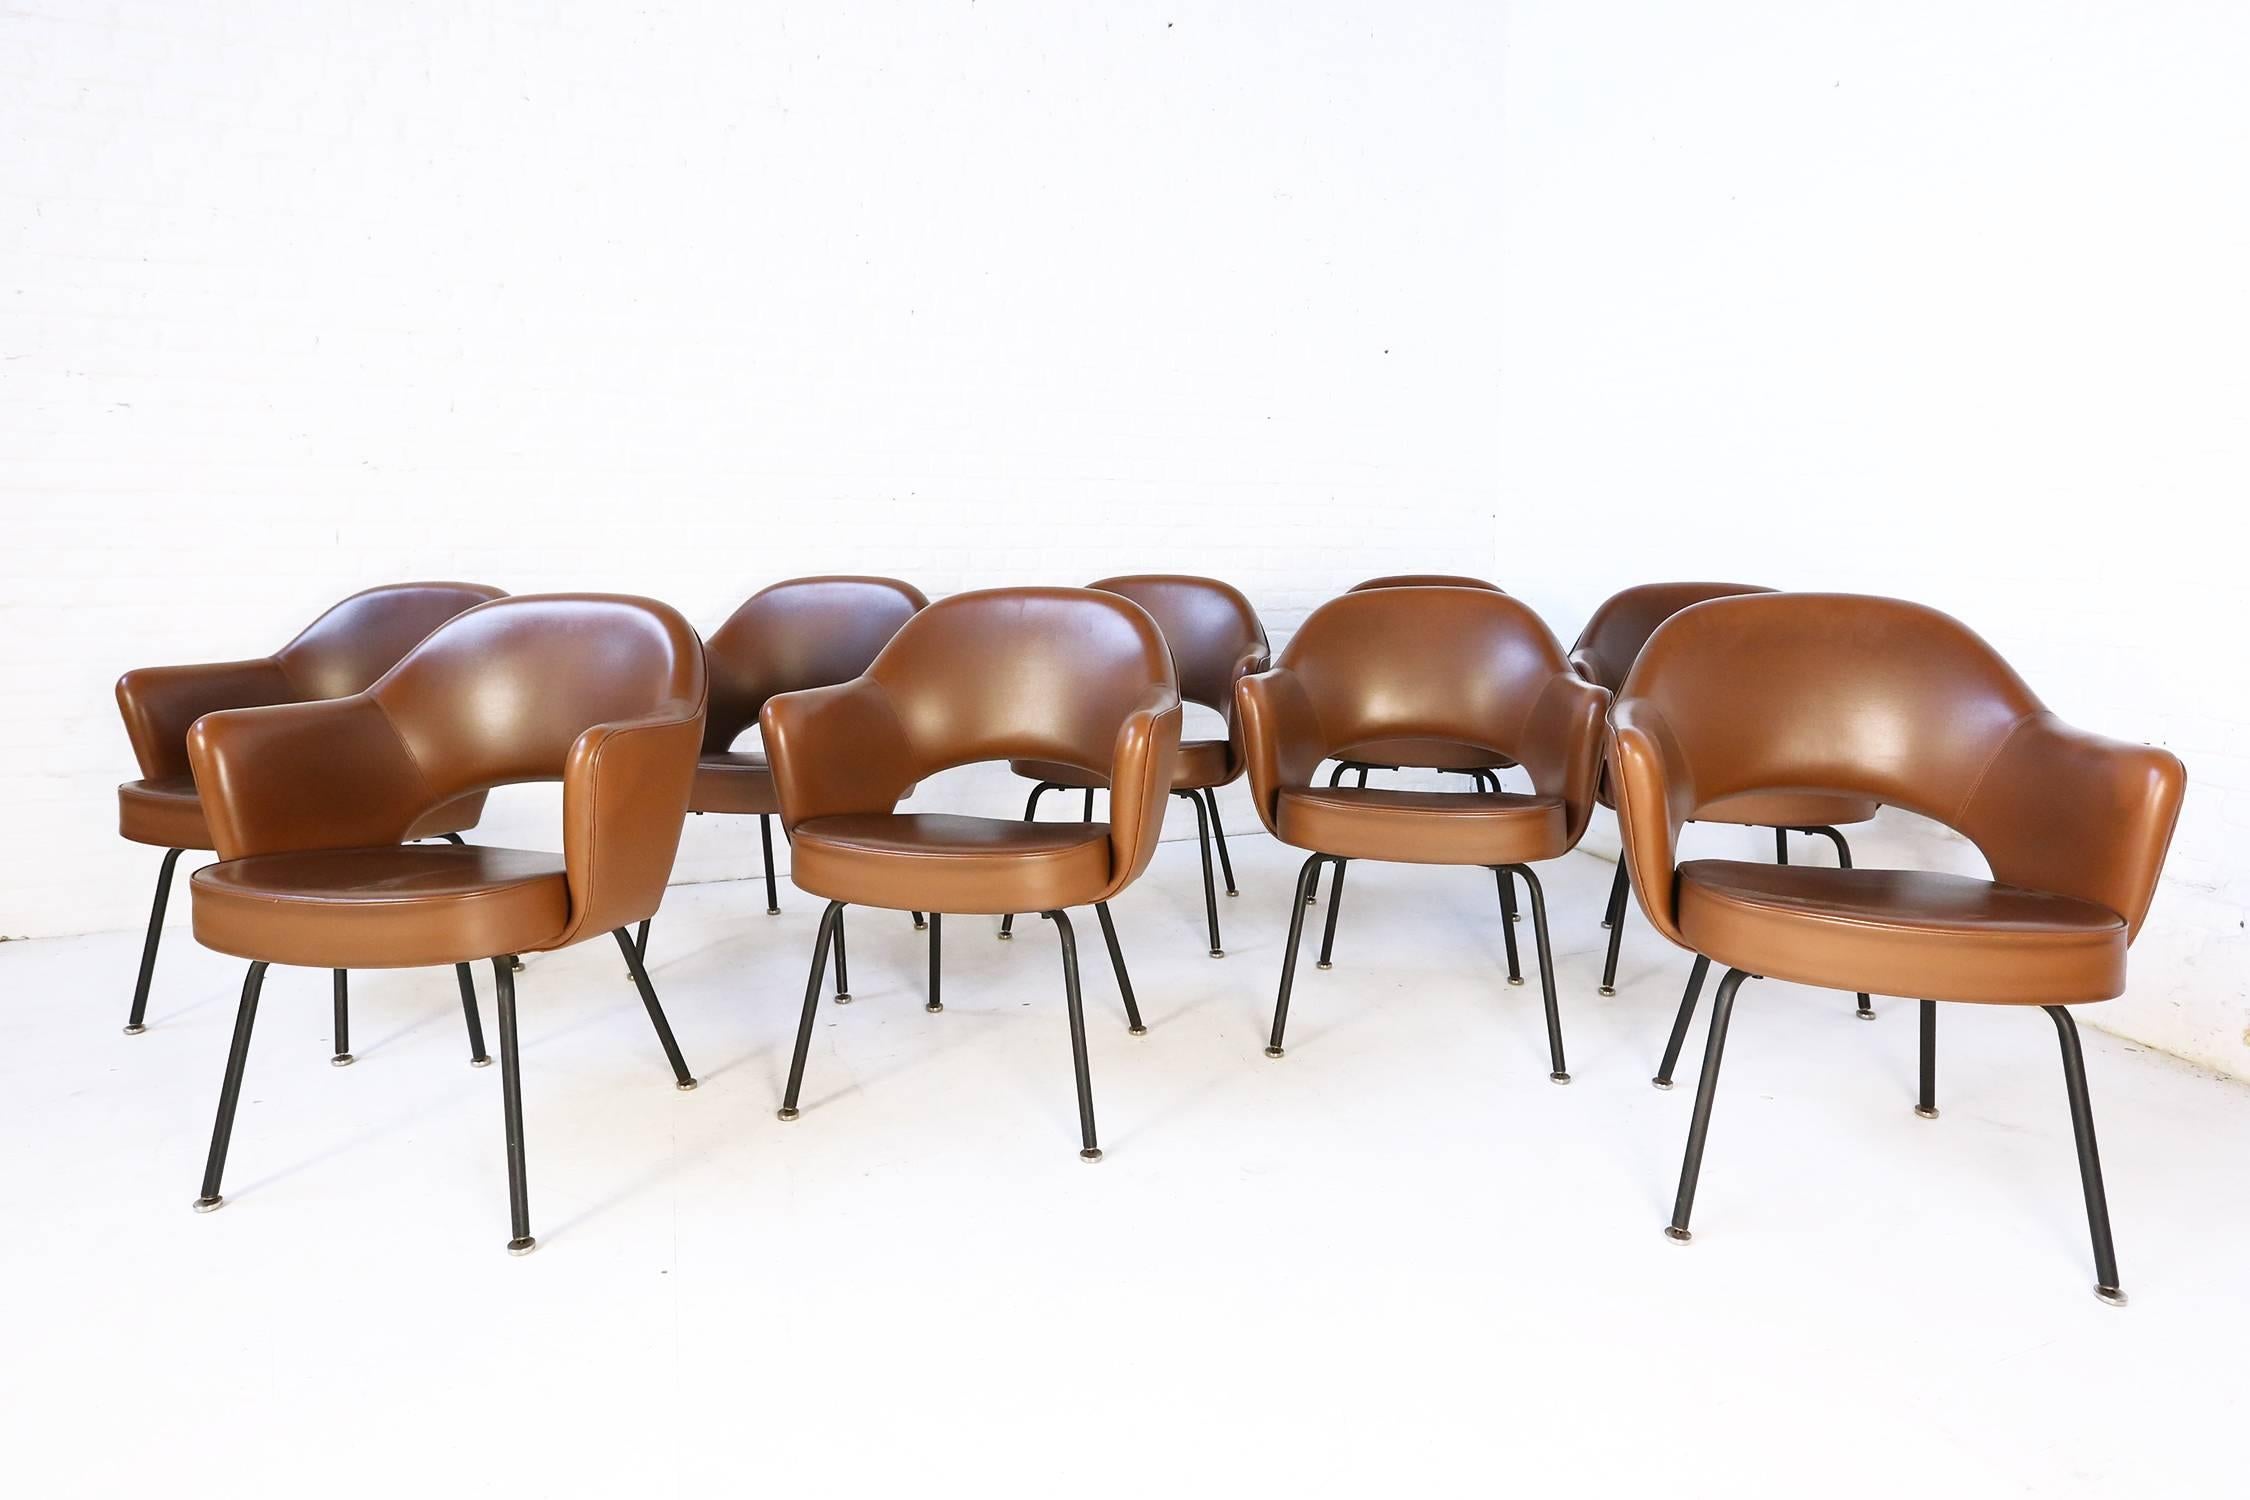 A set of eleven executive armless chairs by Eero Saarinen for Knoll, designed in 1950. All in original upholstery. These executive chairs have become an iconic image of midcentury design and have grown from mere office chairs to chairs using in